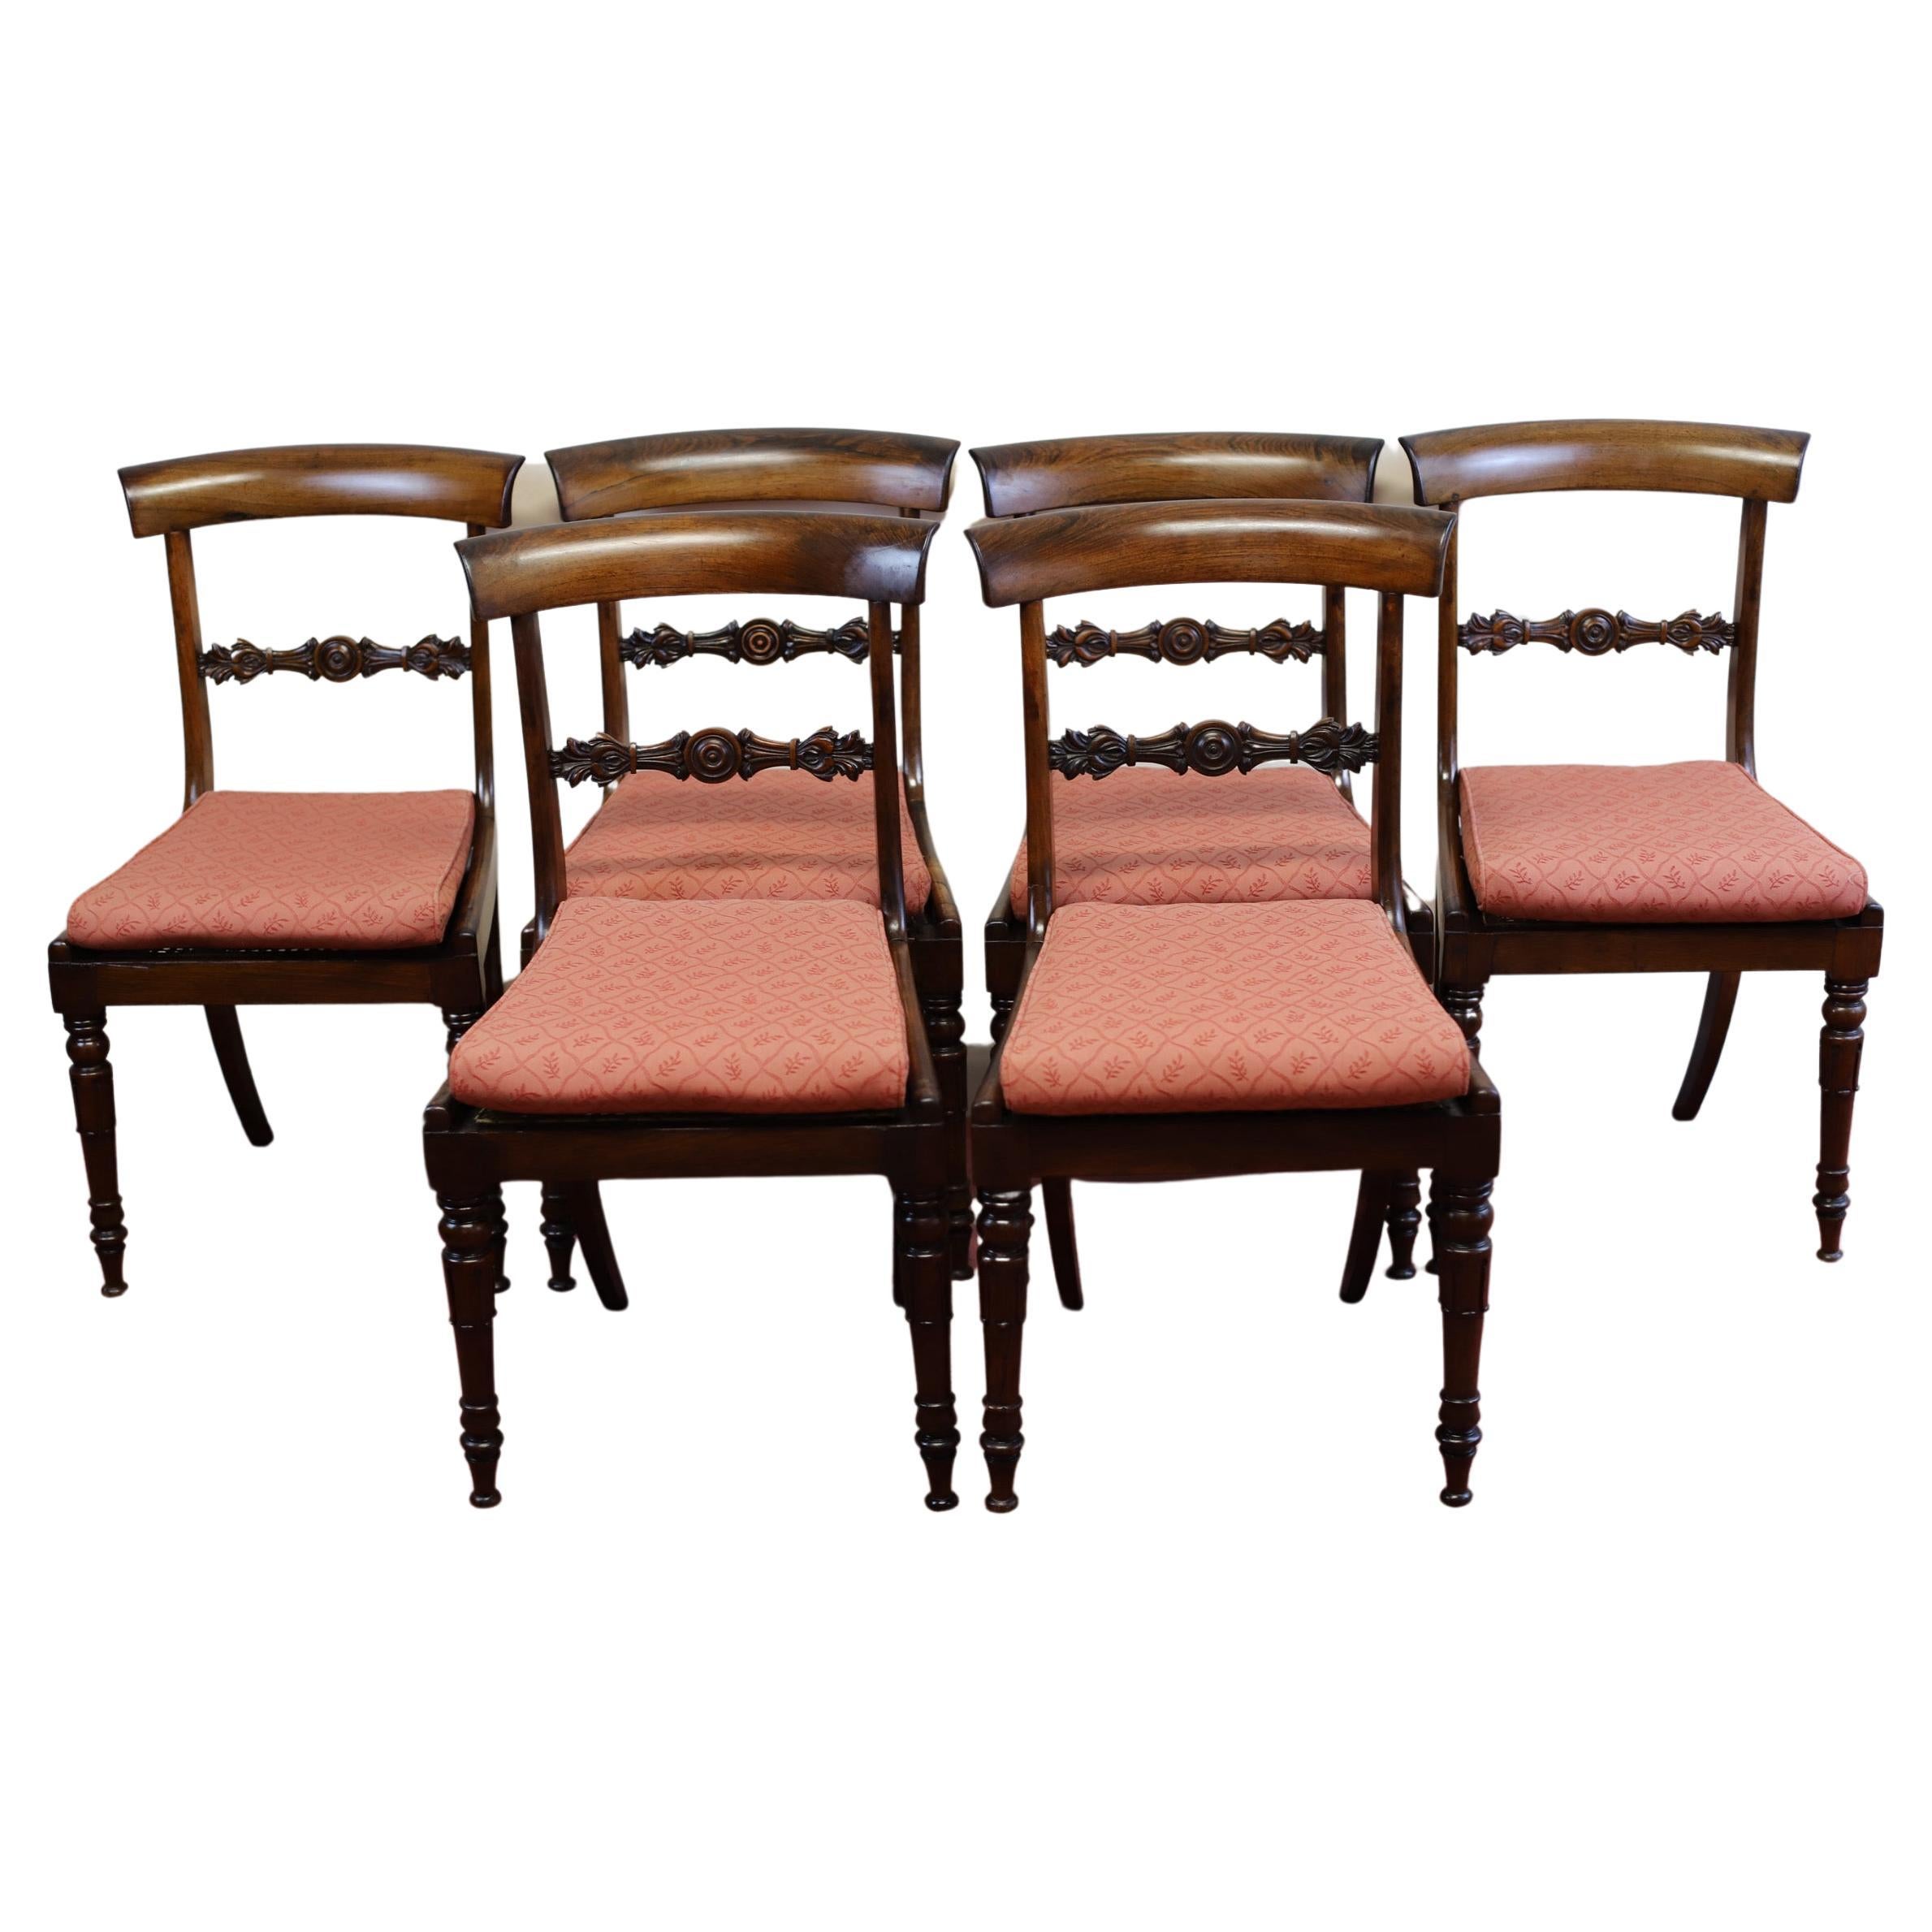 We delight to offer for sale this amazing set of six William IV rosewood cane seat dining chairs, with squab cushion seats and standing on reeded tapering legs to the front and out swept back legs.
Don't hesitate to contact me if you have any